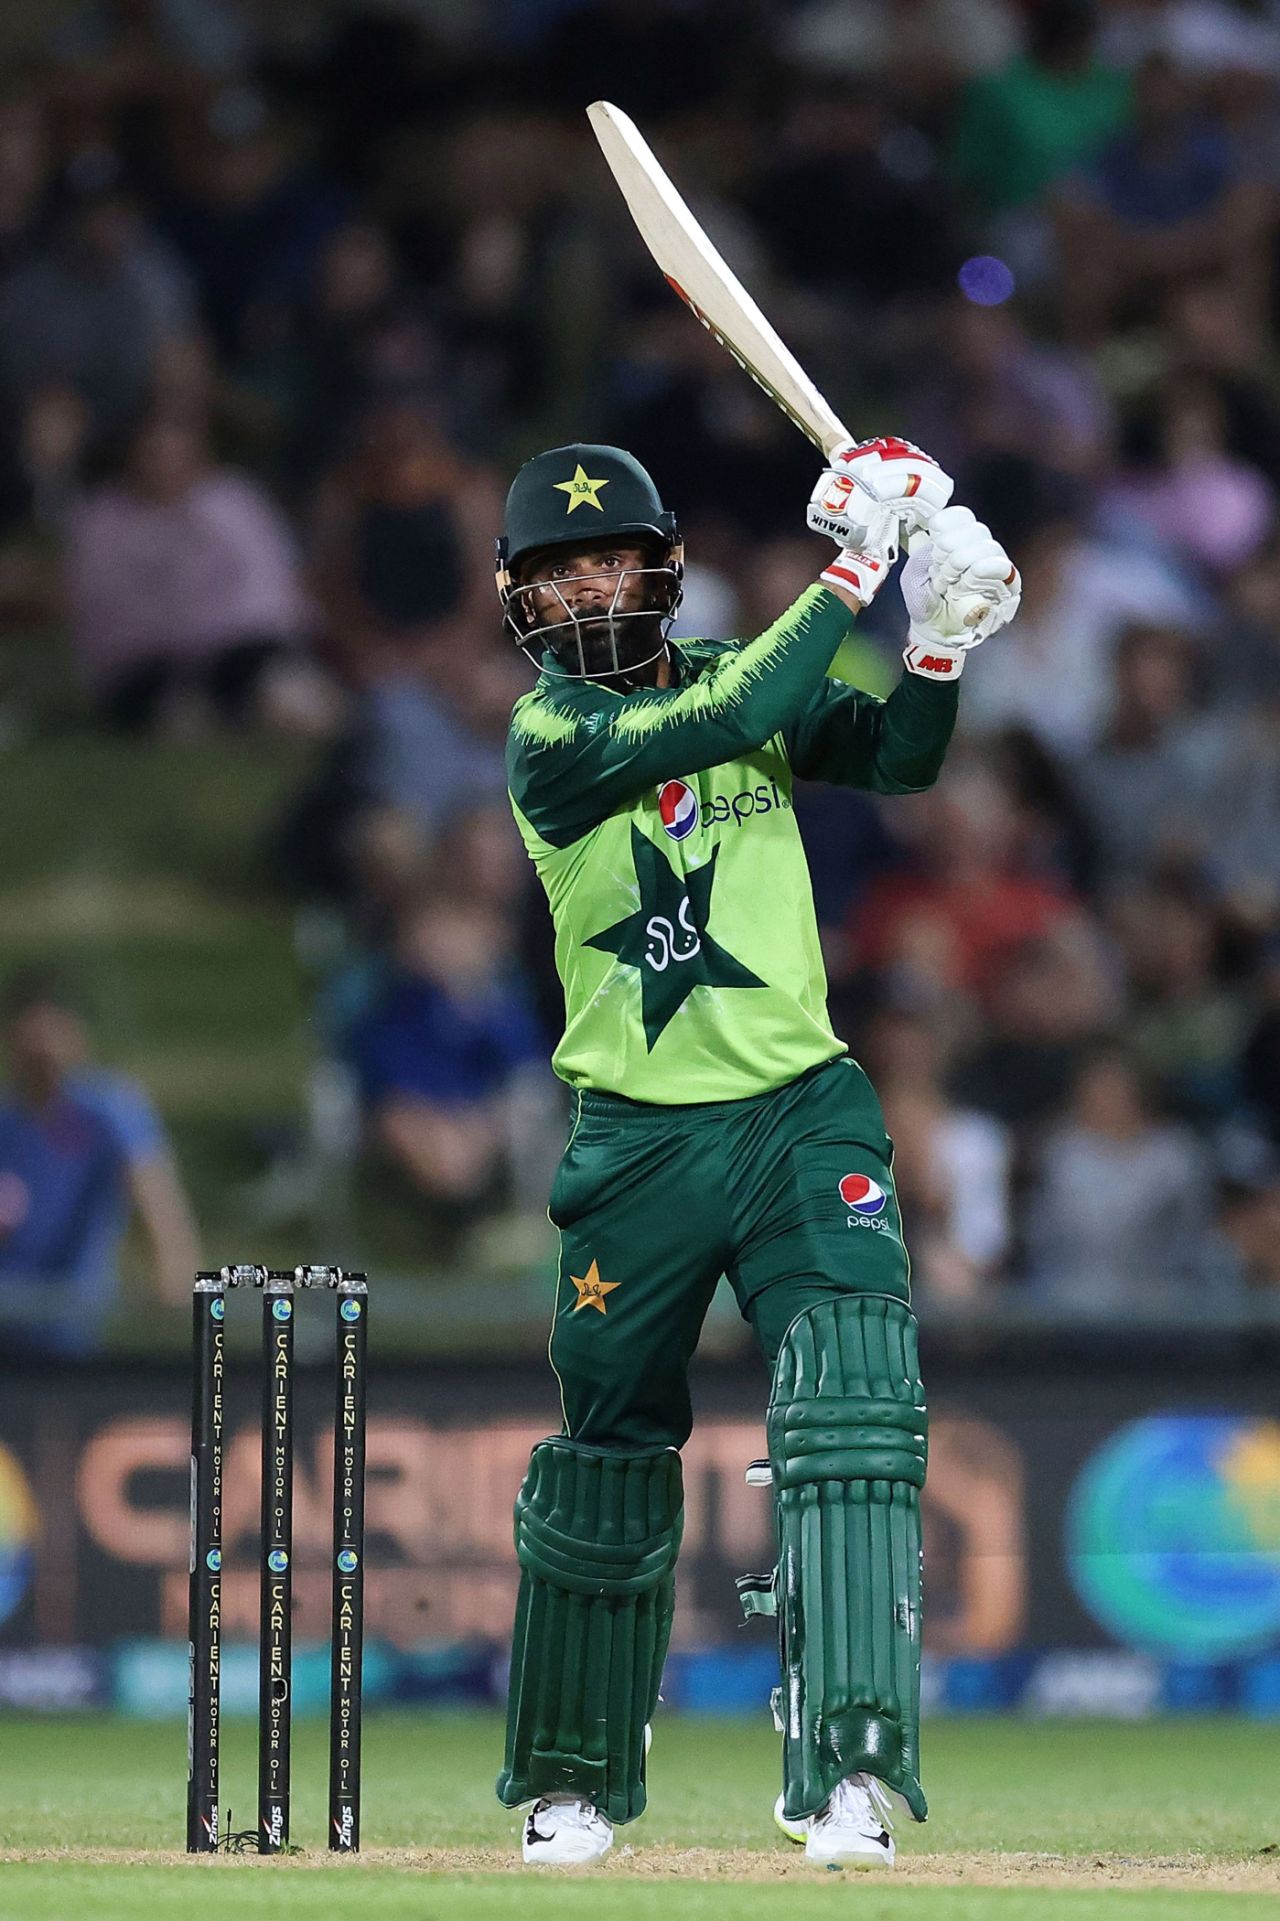 Mohammad Hafeez: in the swing of things, New Zealand vs Pakistan, 3rd T20I, Napier, December 22, 2020